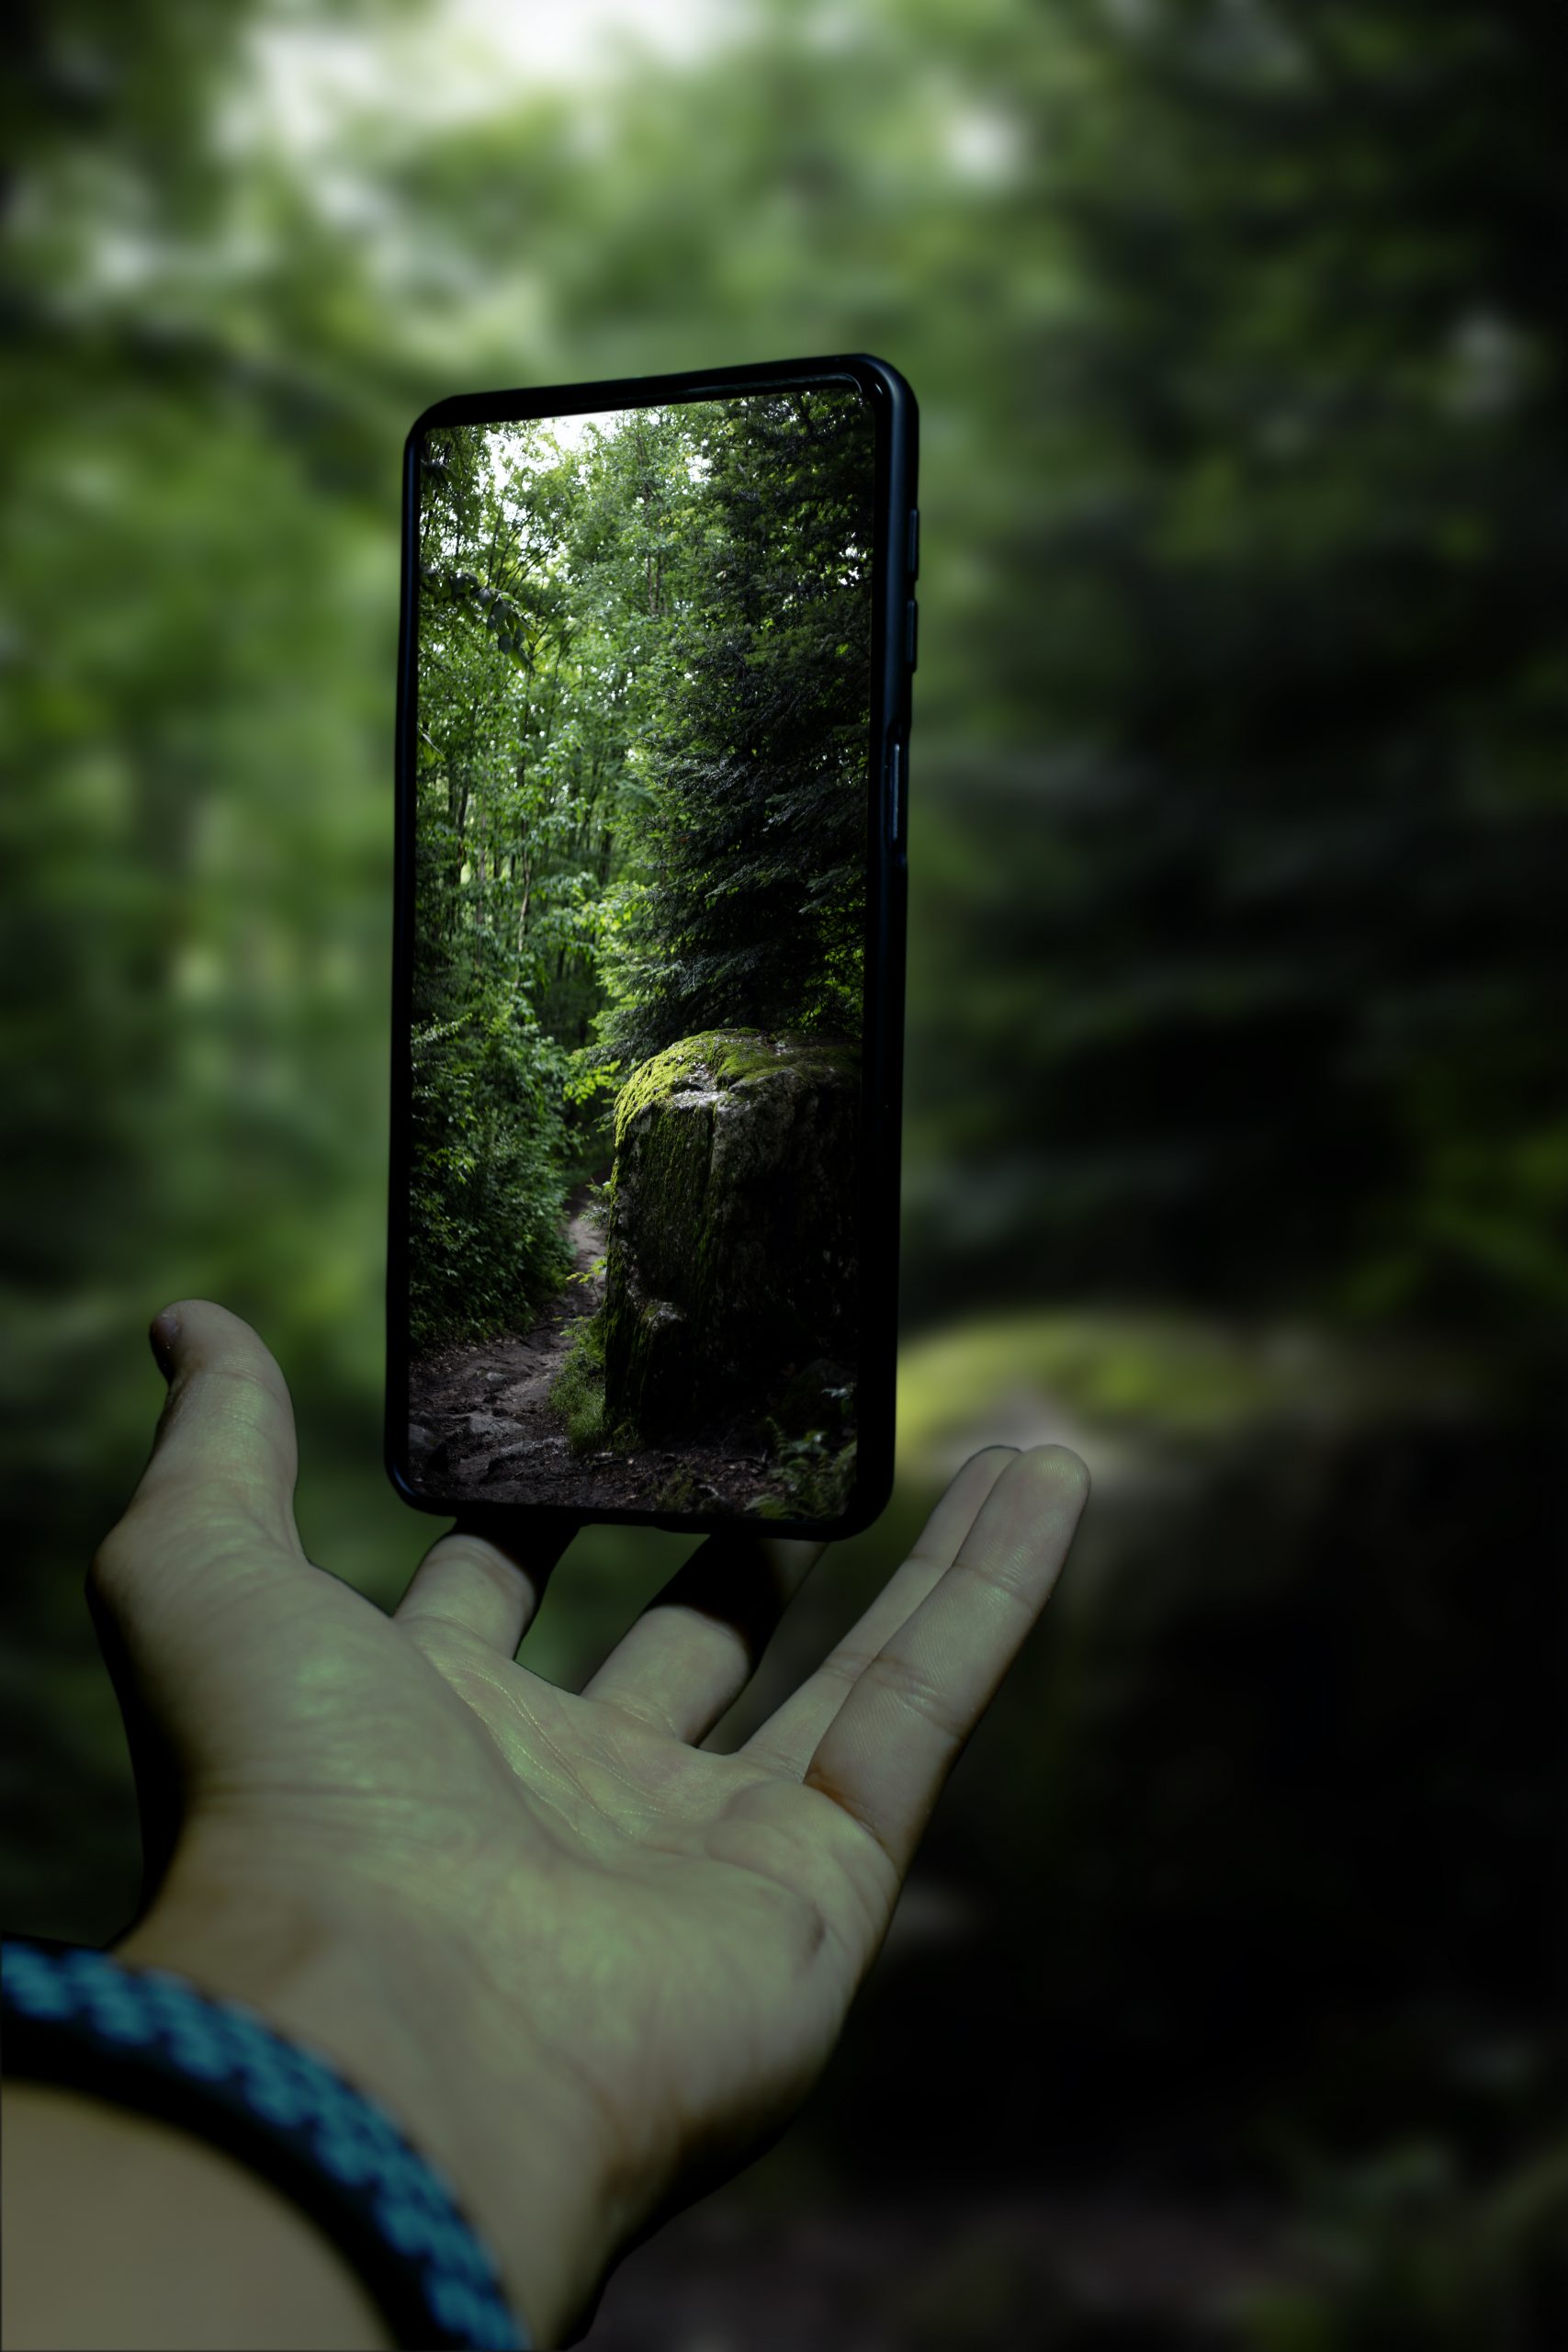 Capturing nature image with smartphone